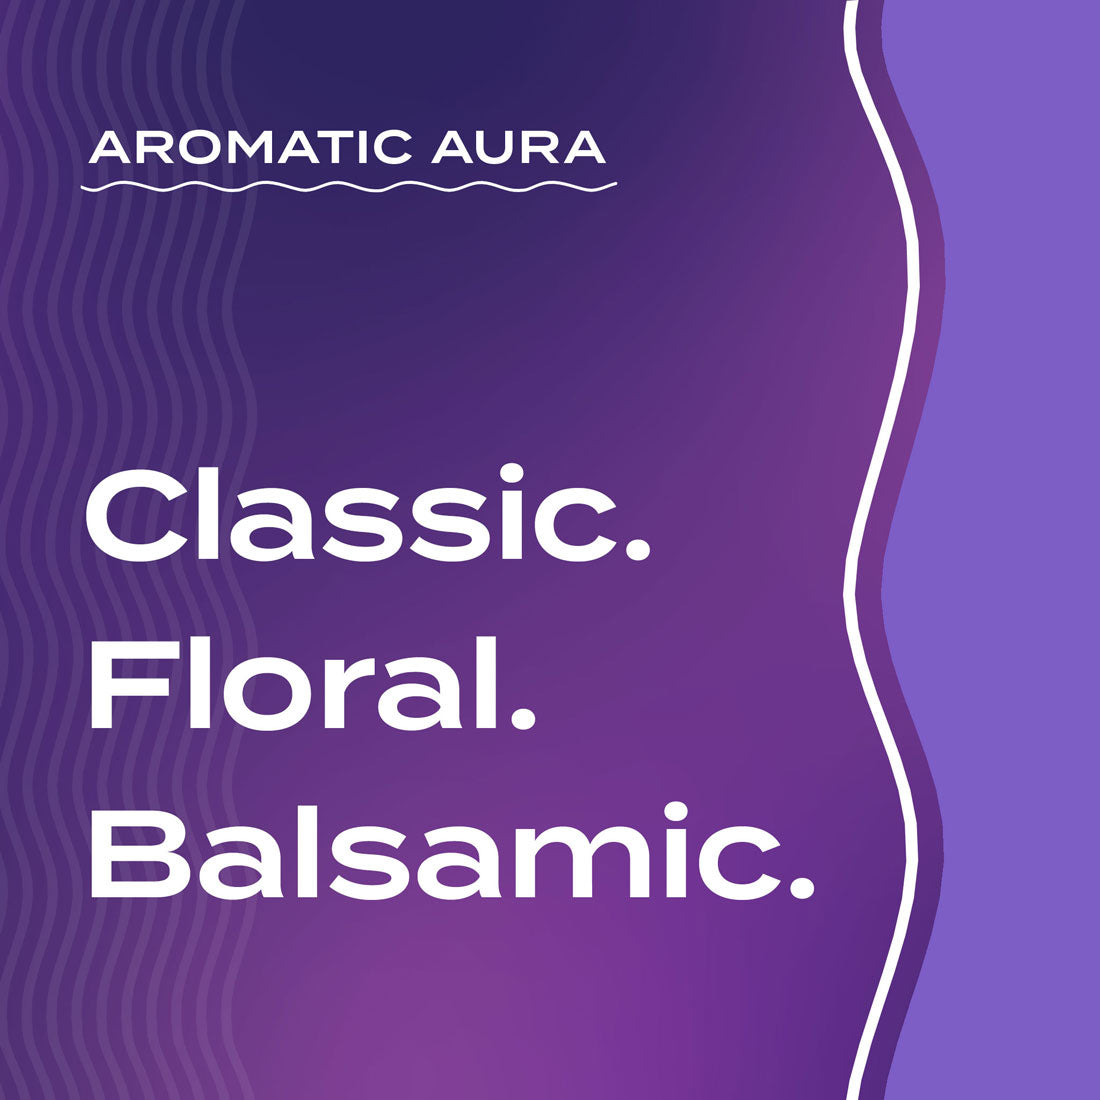 Text graphic depicting the aromatic aroma of Lavender: classic, floral, balsamic.